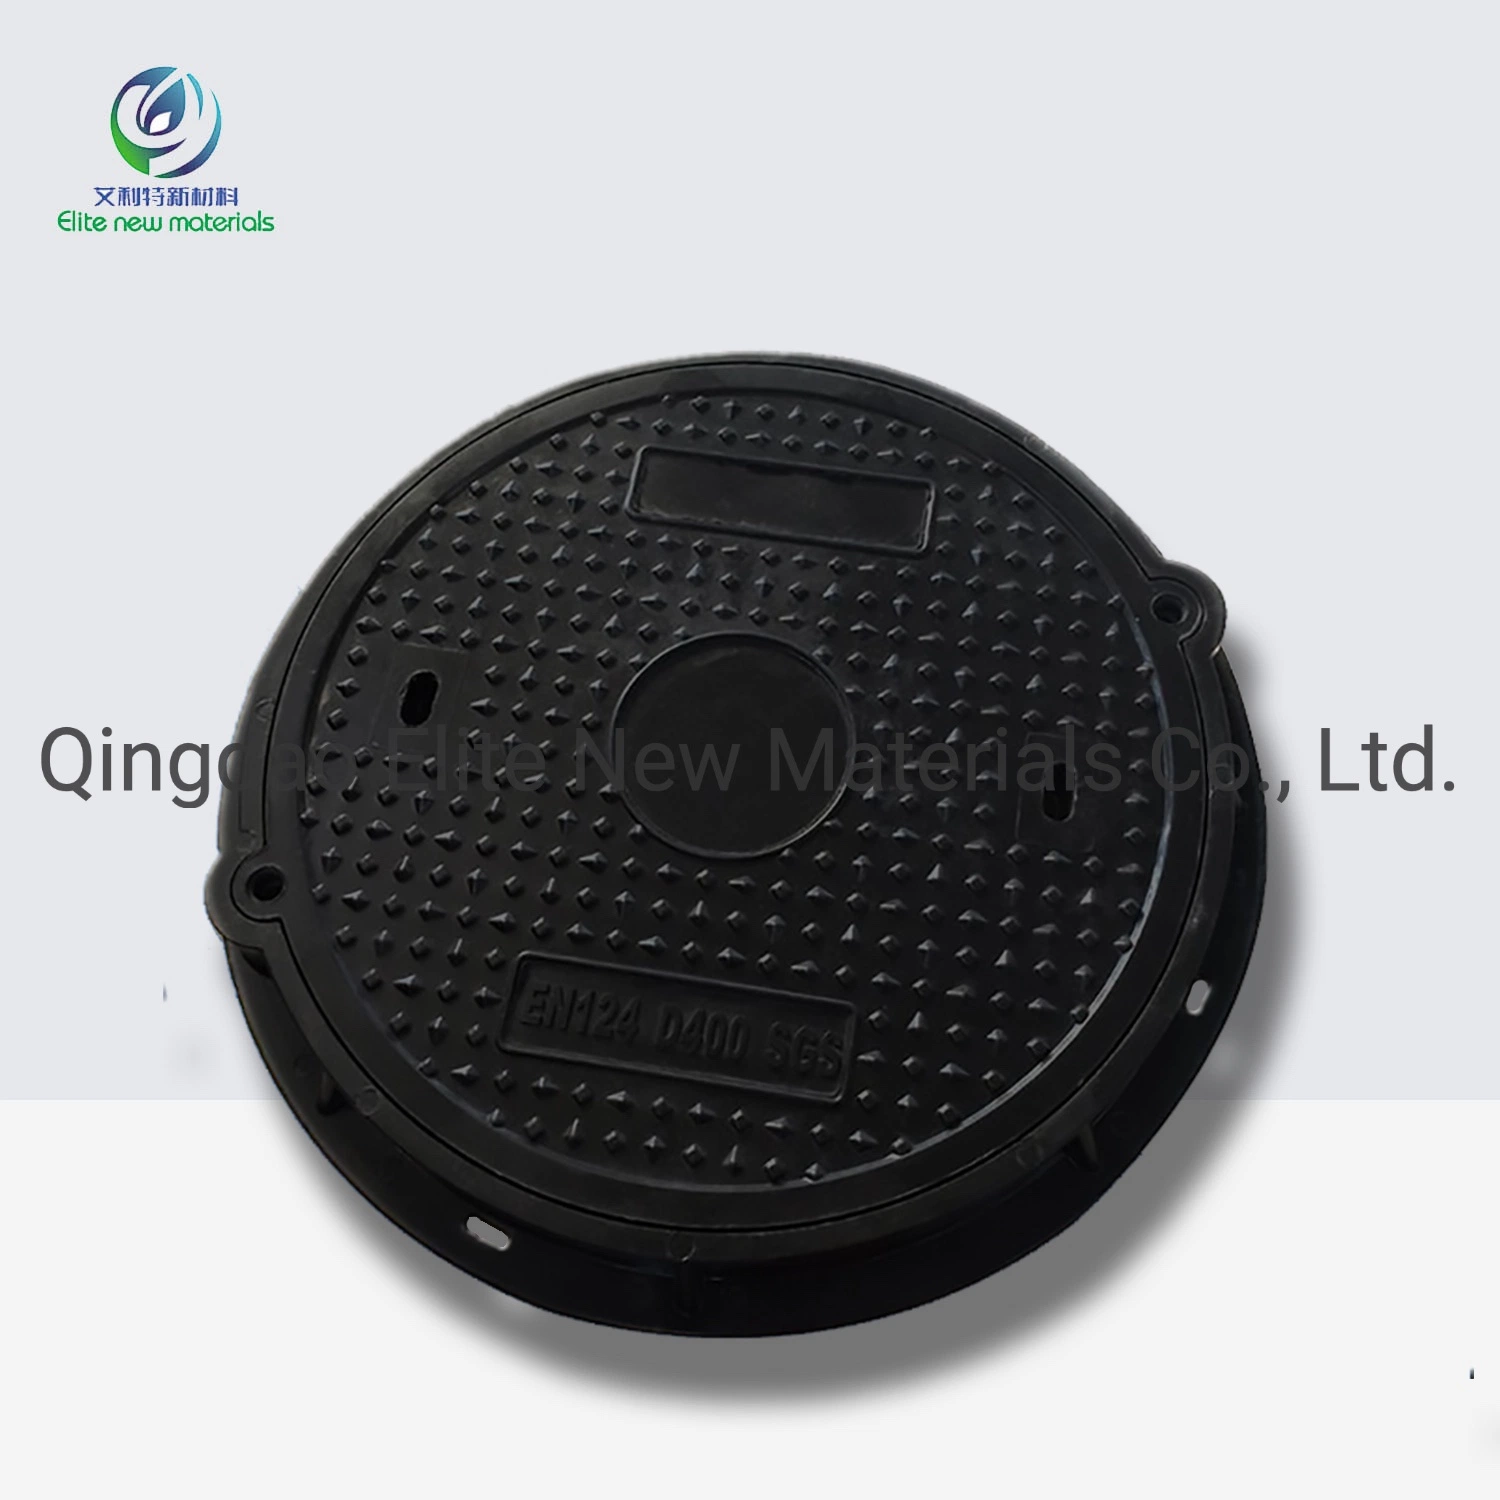 for Telecommunications Well BMC Manhole Cover OEM